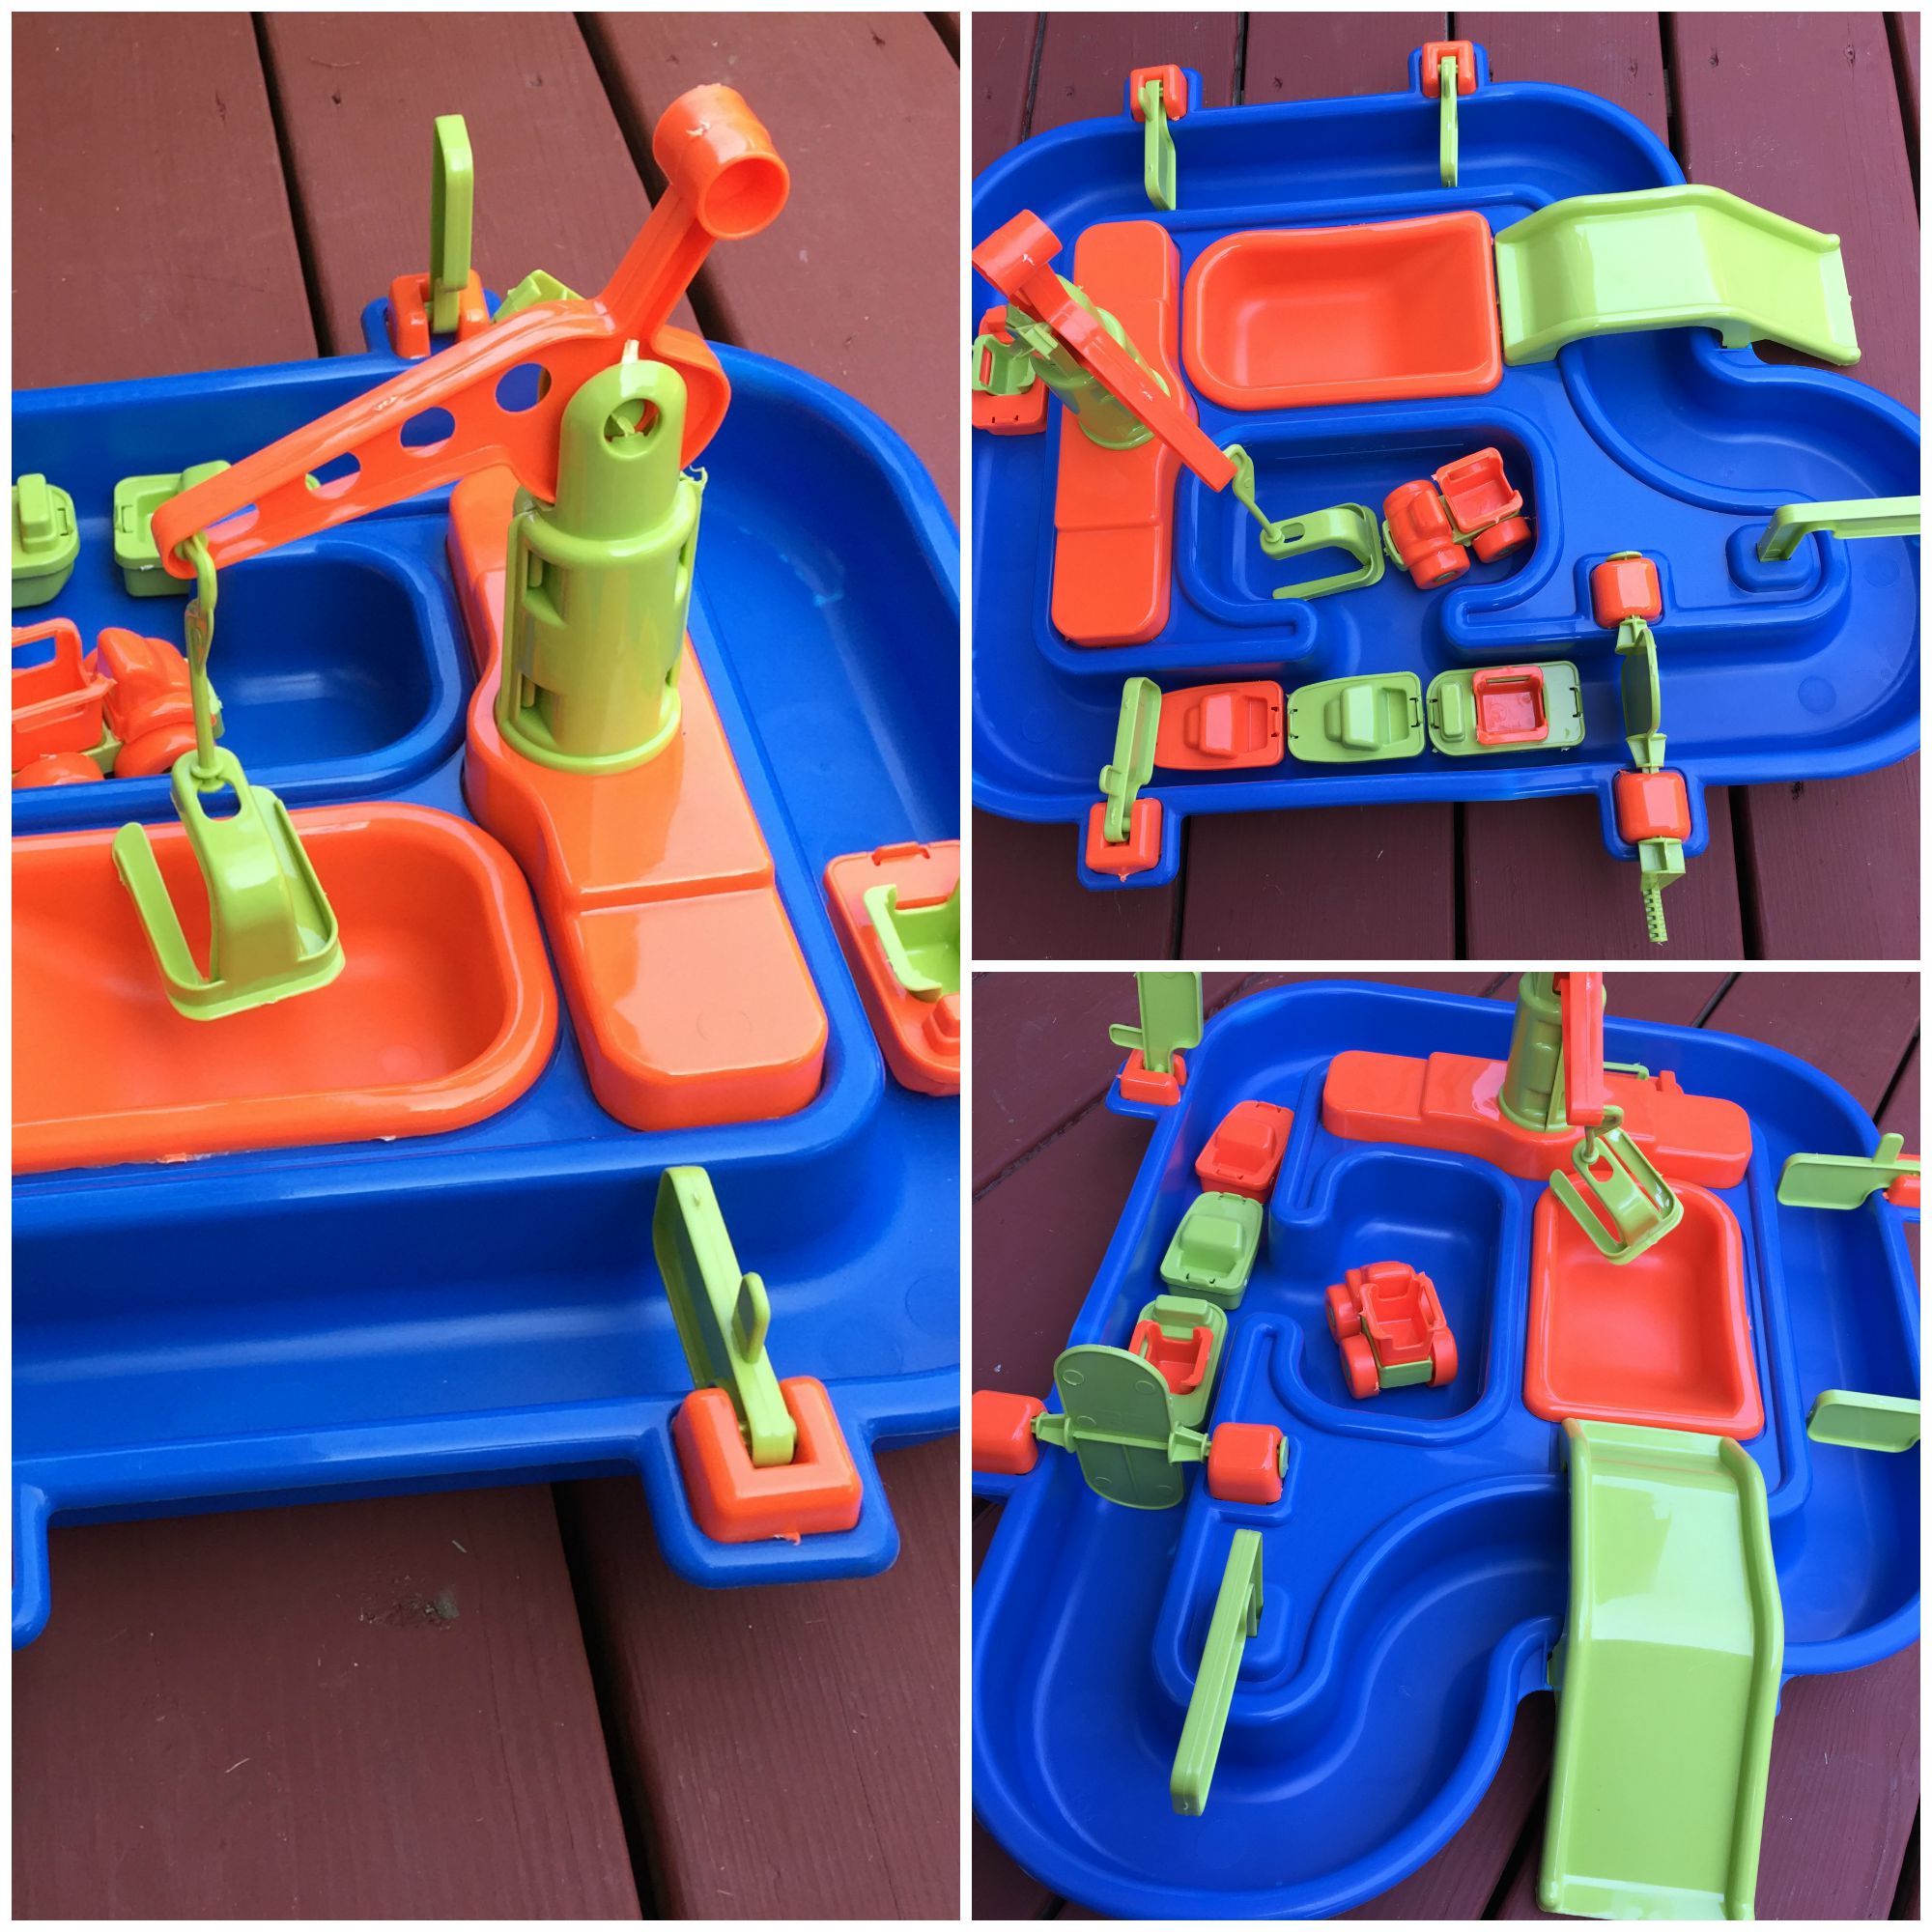 american plastic toys sand and water play table